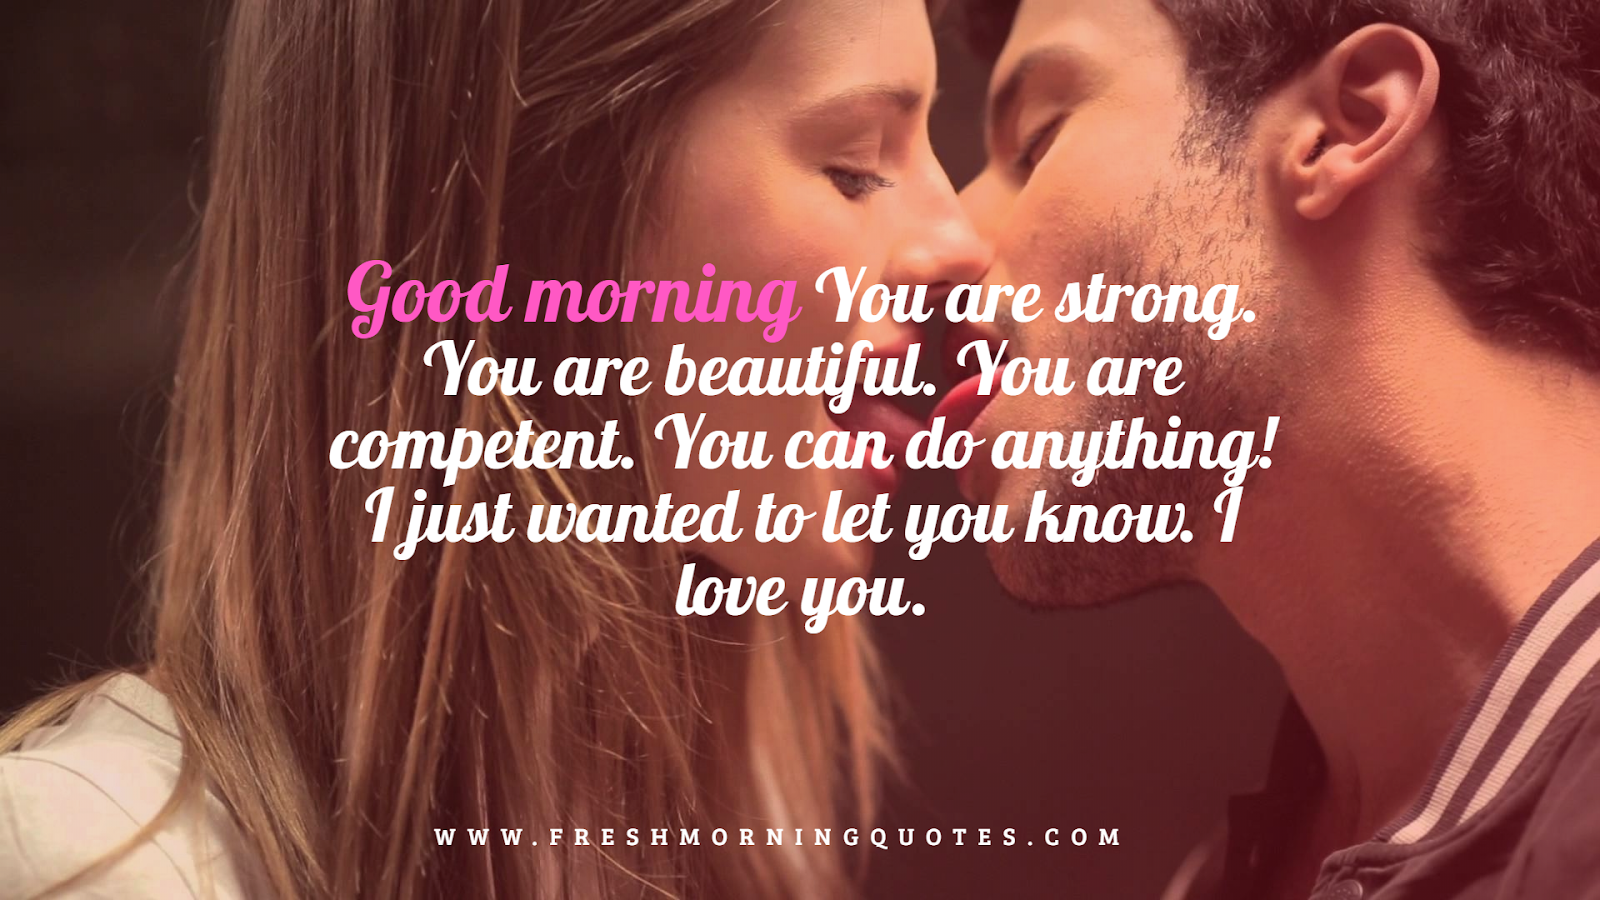 Good Morning Love Photos For Girlfriend With Quotes